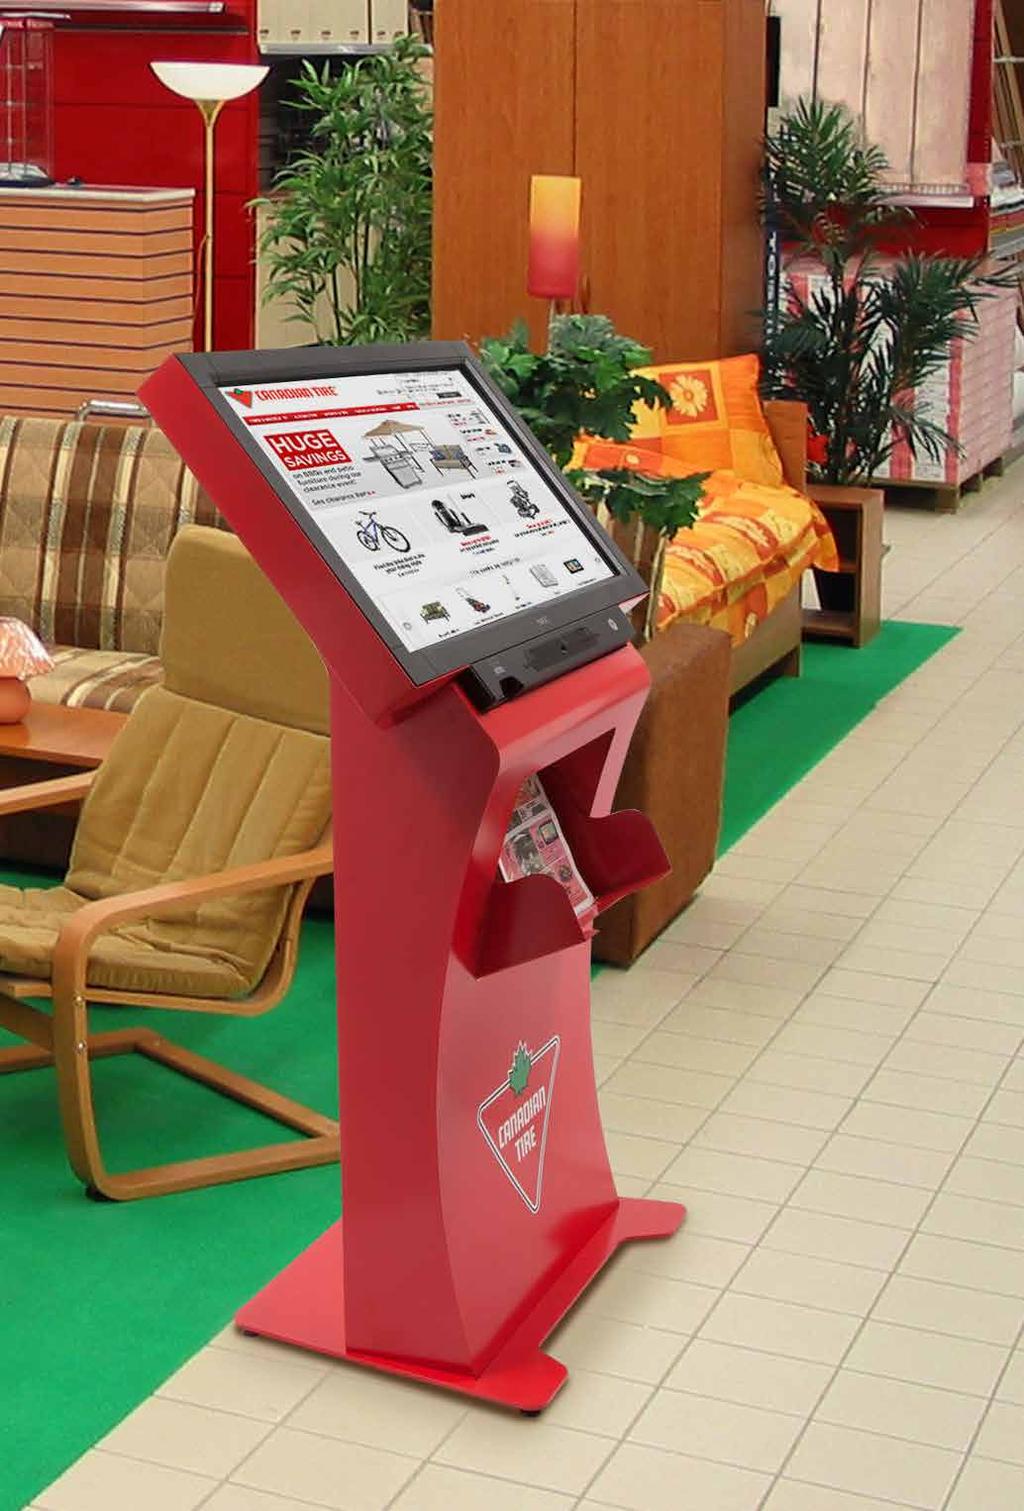 Kiosk Self-check-in integrated with scanner, pay pad